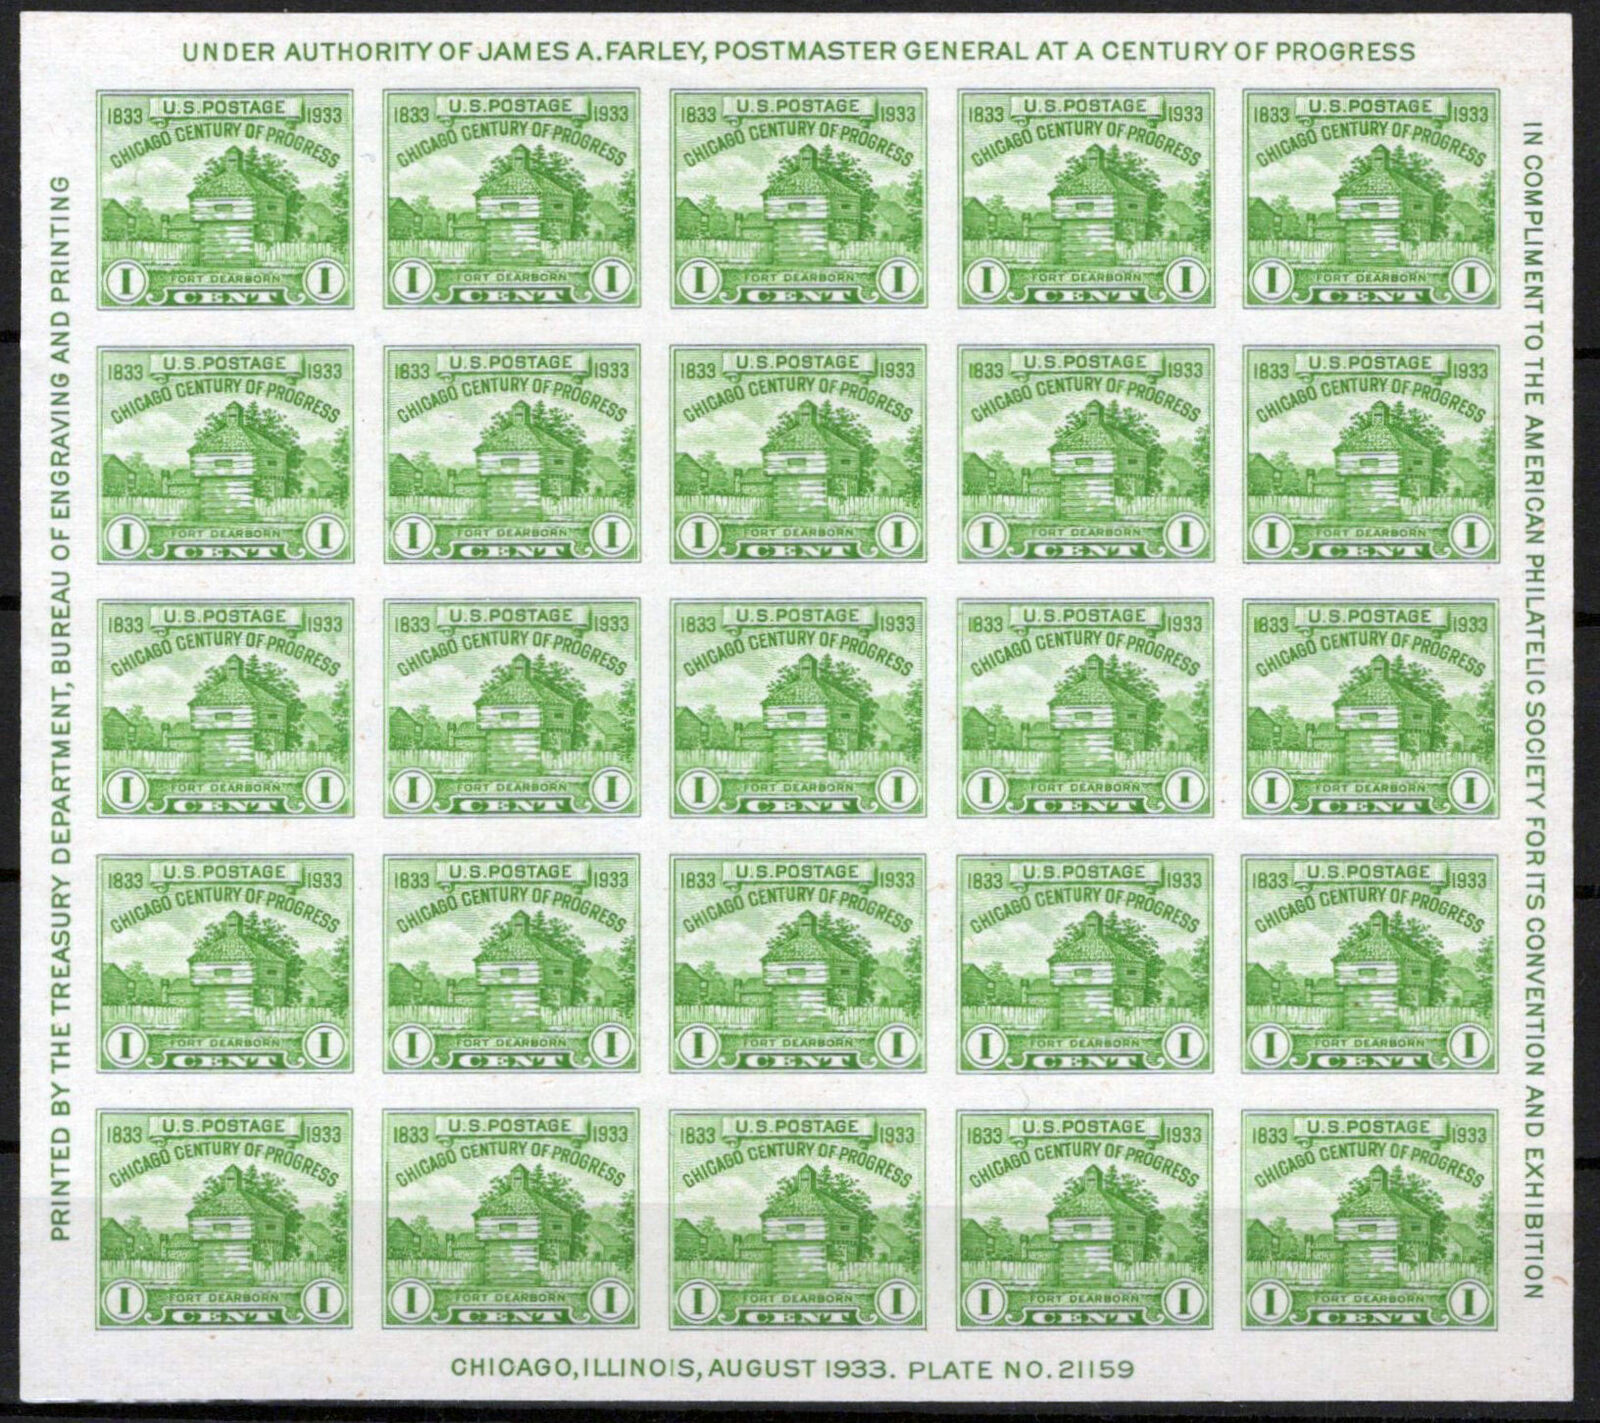 ZAYIX US 730 MNH Century of Progress Sheet NG as issued Ft Dearborn 031023SM36M